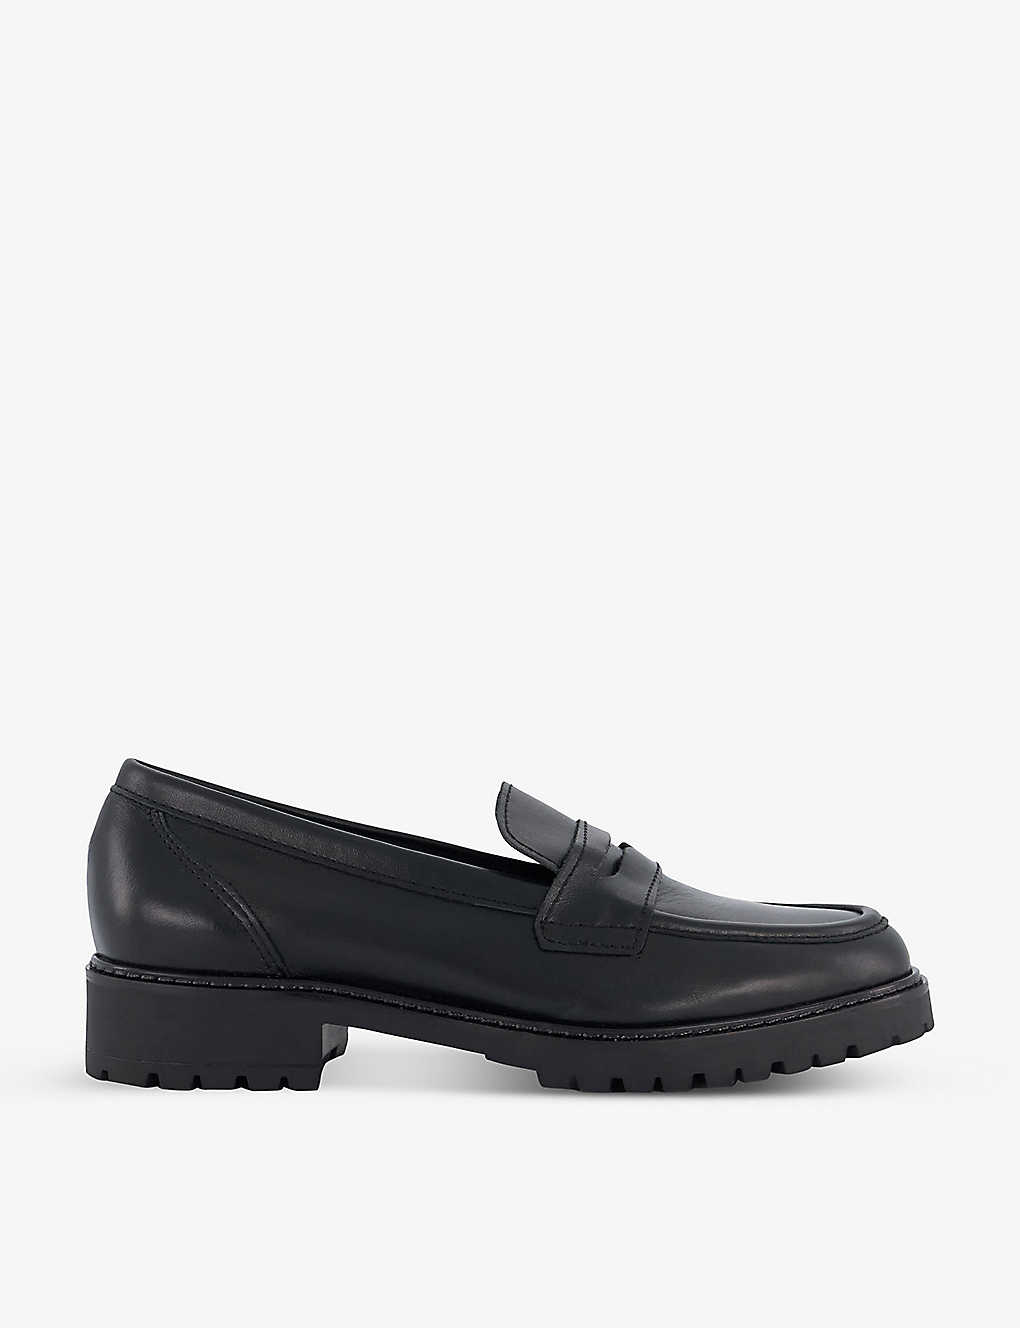 Dune Womens Black-black Leather Gild Cleated-sole Leather Penny Loafer